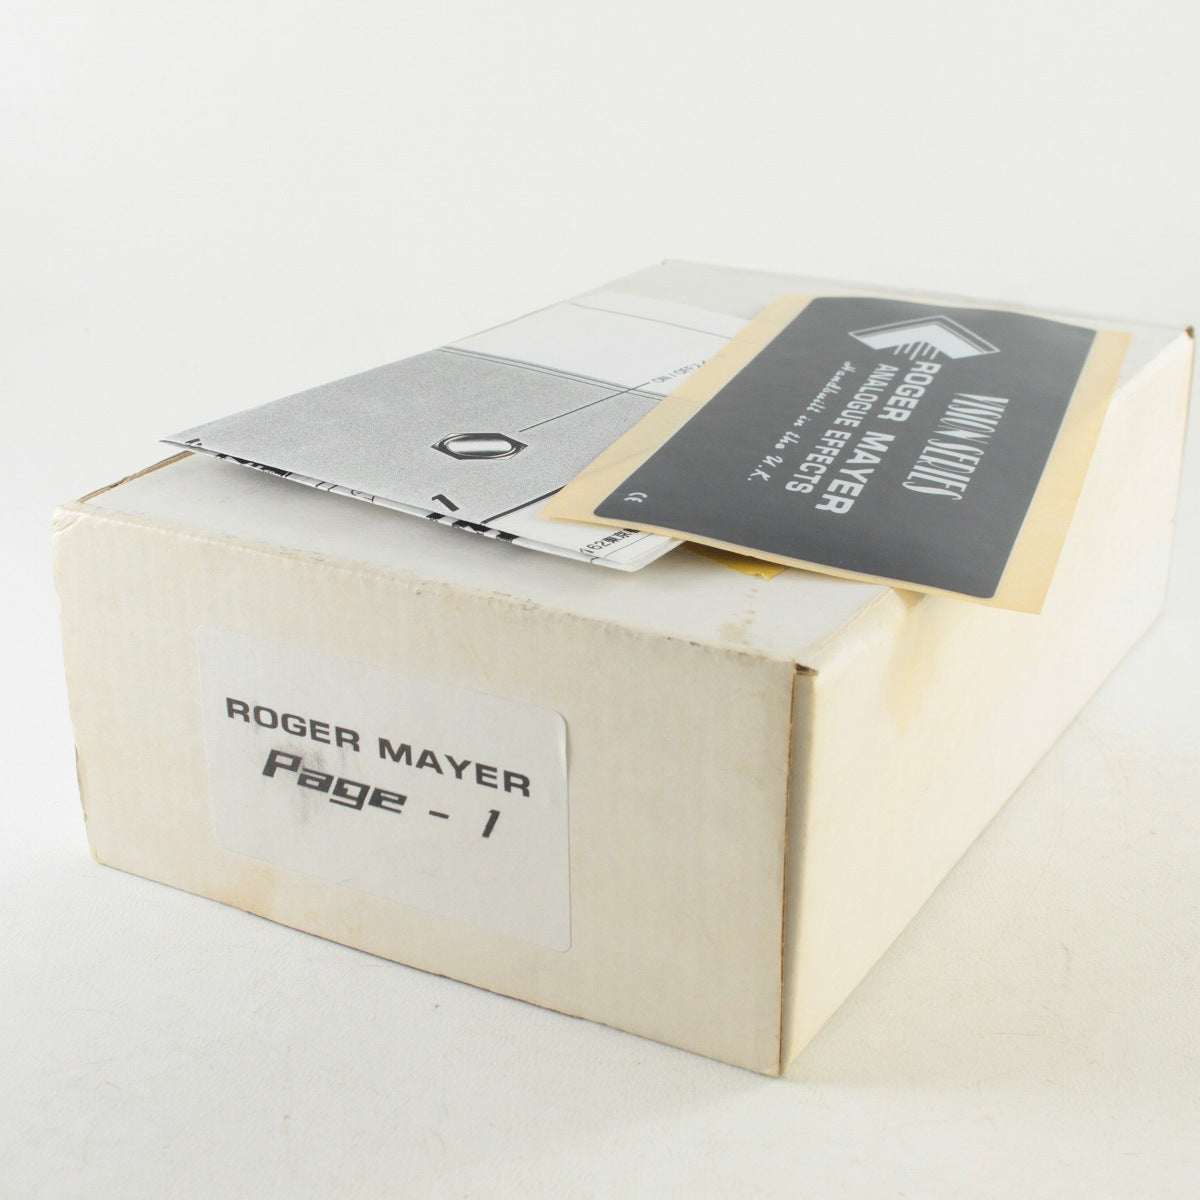 USED ROGER MAYER / Page-1 [03]